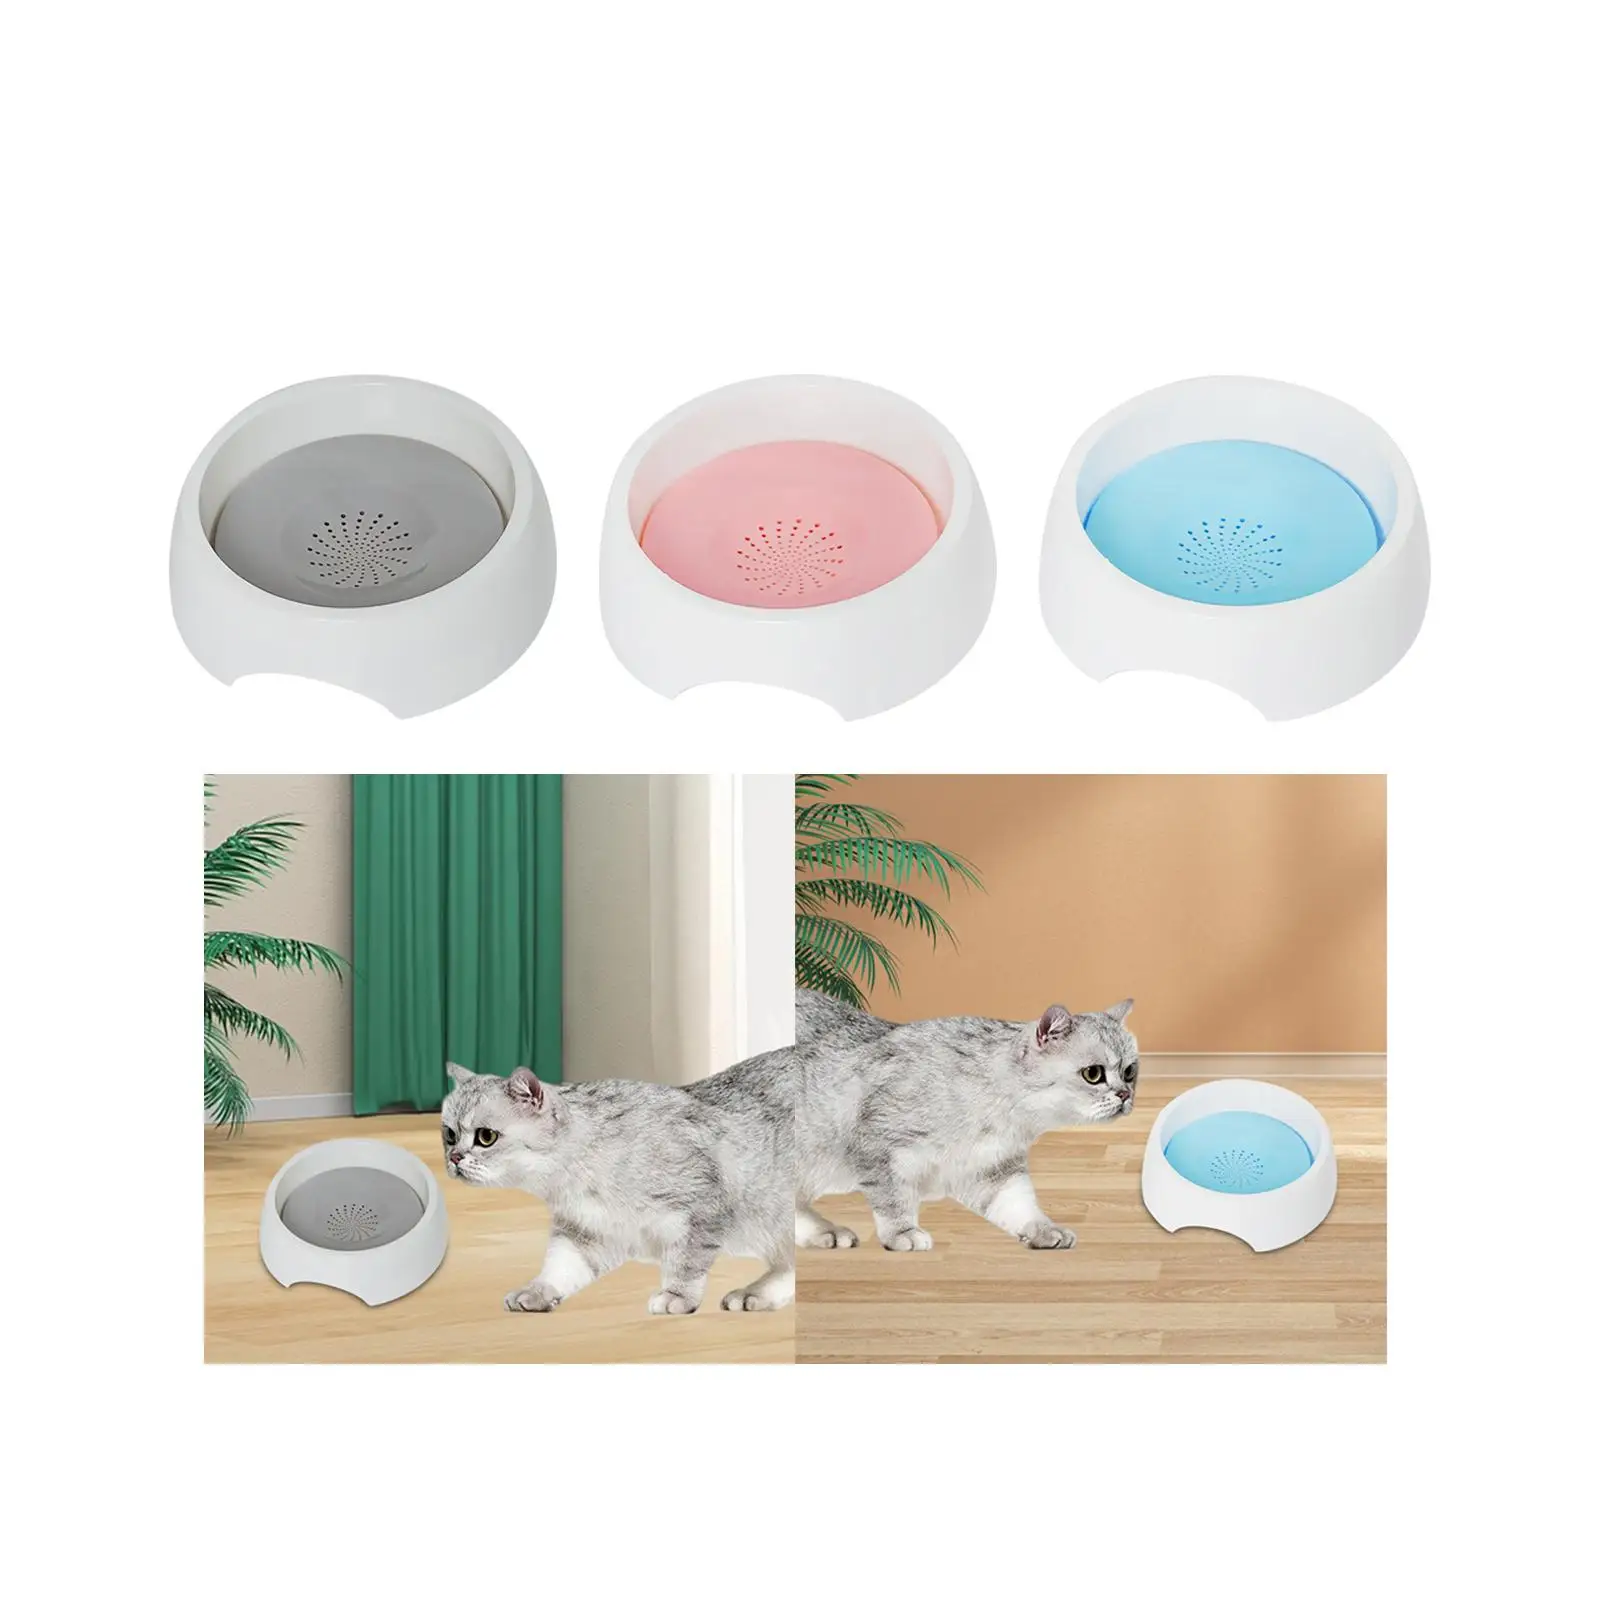 Pet Floating Bowl No Slip Portable Not Spill Vehicle Carried Not Wetting Mouth with Floating Disk Dog Drinking Water Bowl Puppy